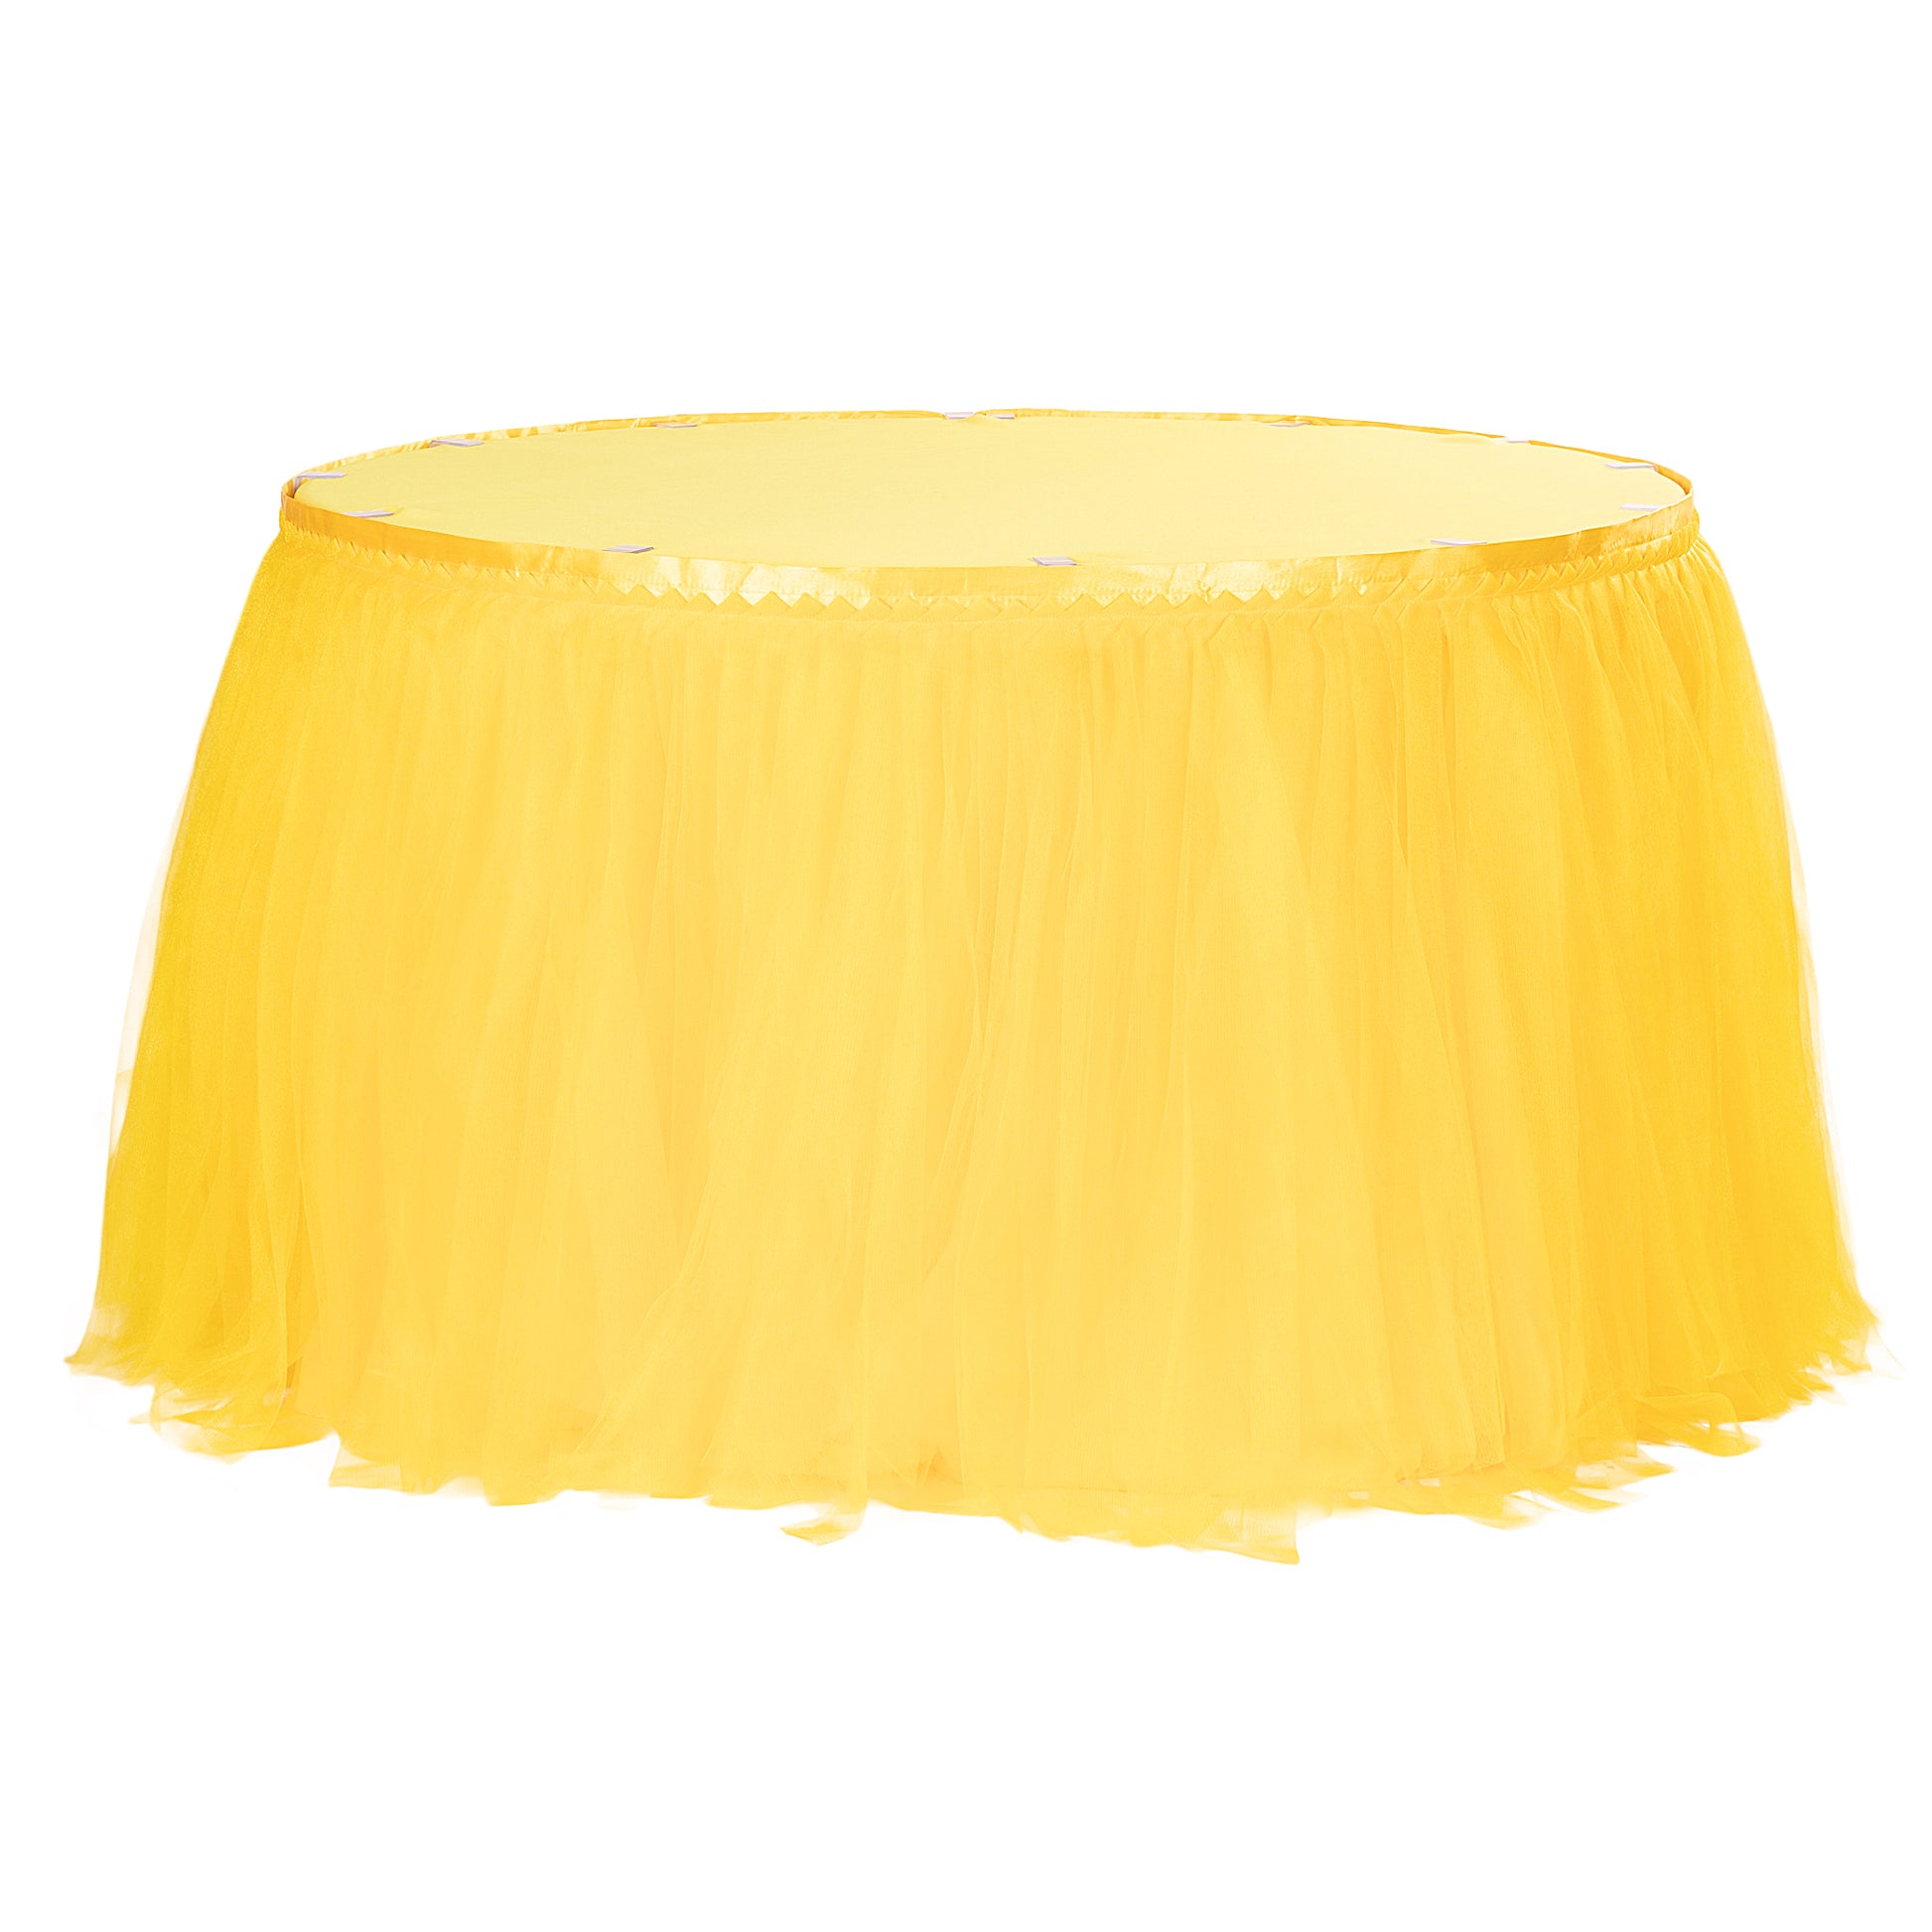 Tulle Tutu 17ft Table Skirt - Canary Yellow - CV Linens